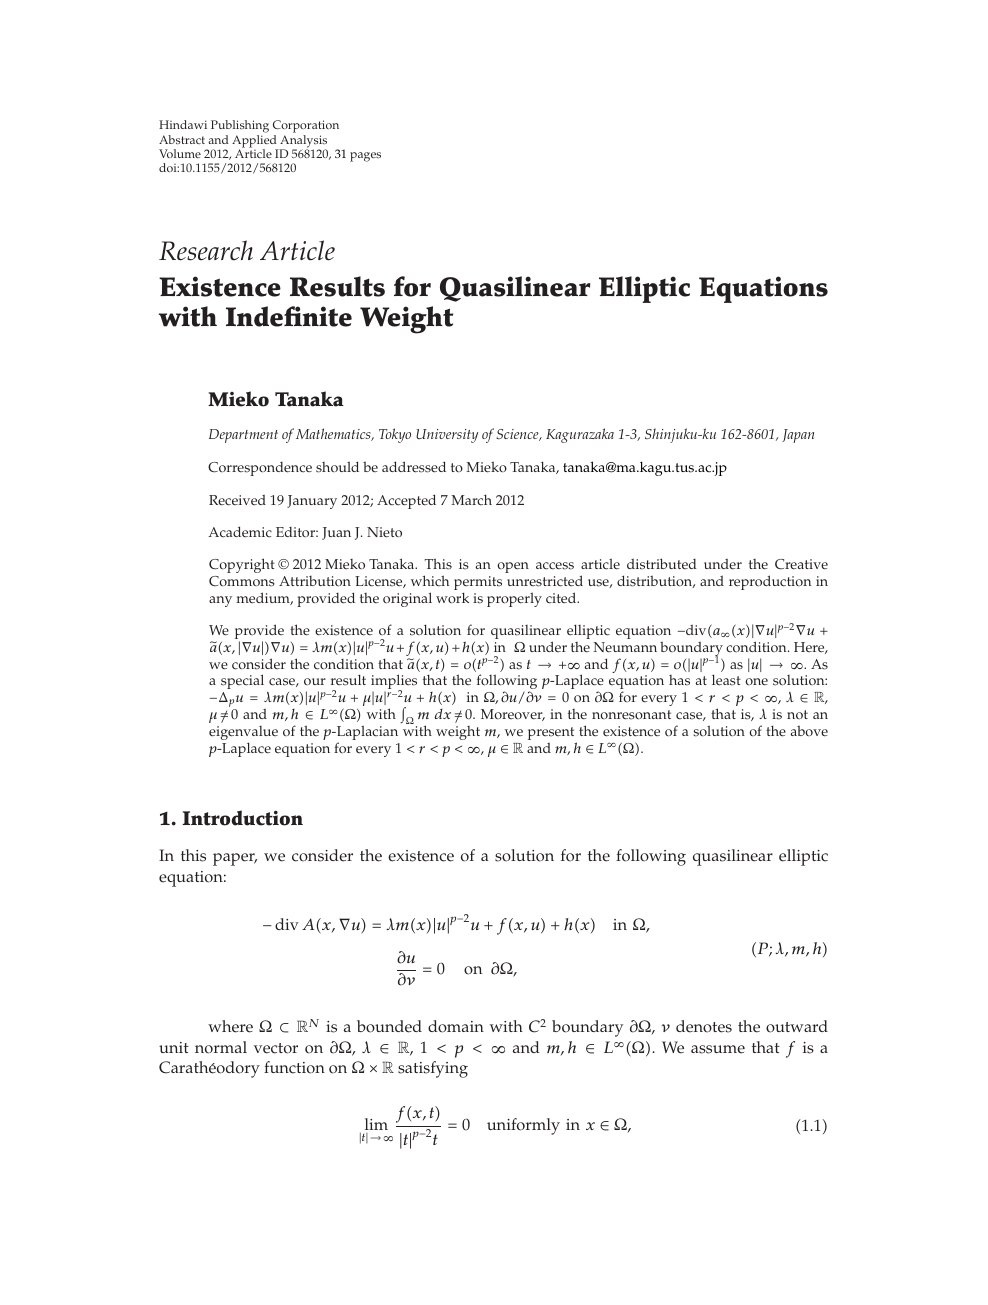 Existence Results For Quasilinear Elliptic Equations With Indefinite Weight Topic Of Research Paper In Mathematics Download Scholarly Article Pdf And Read For Free On Cyberleninka Open Science Hub